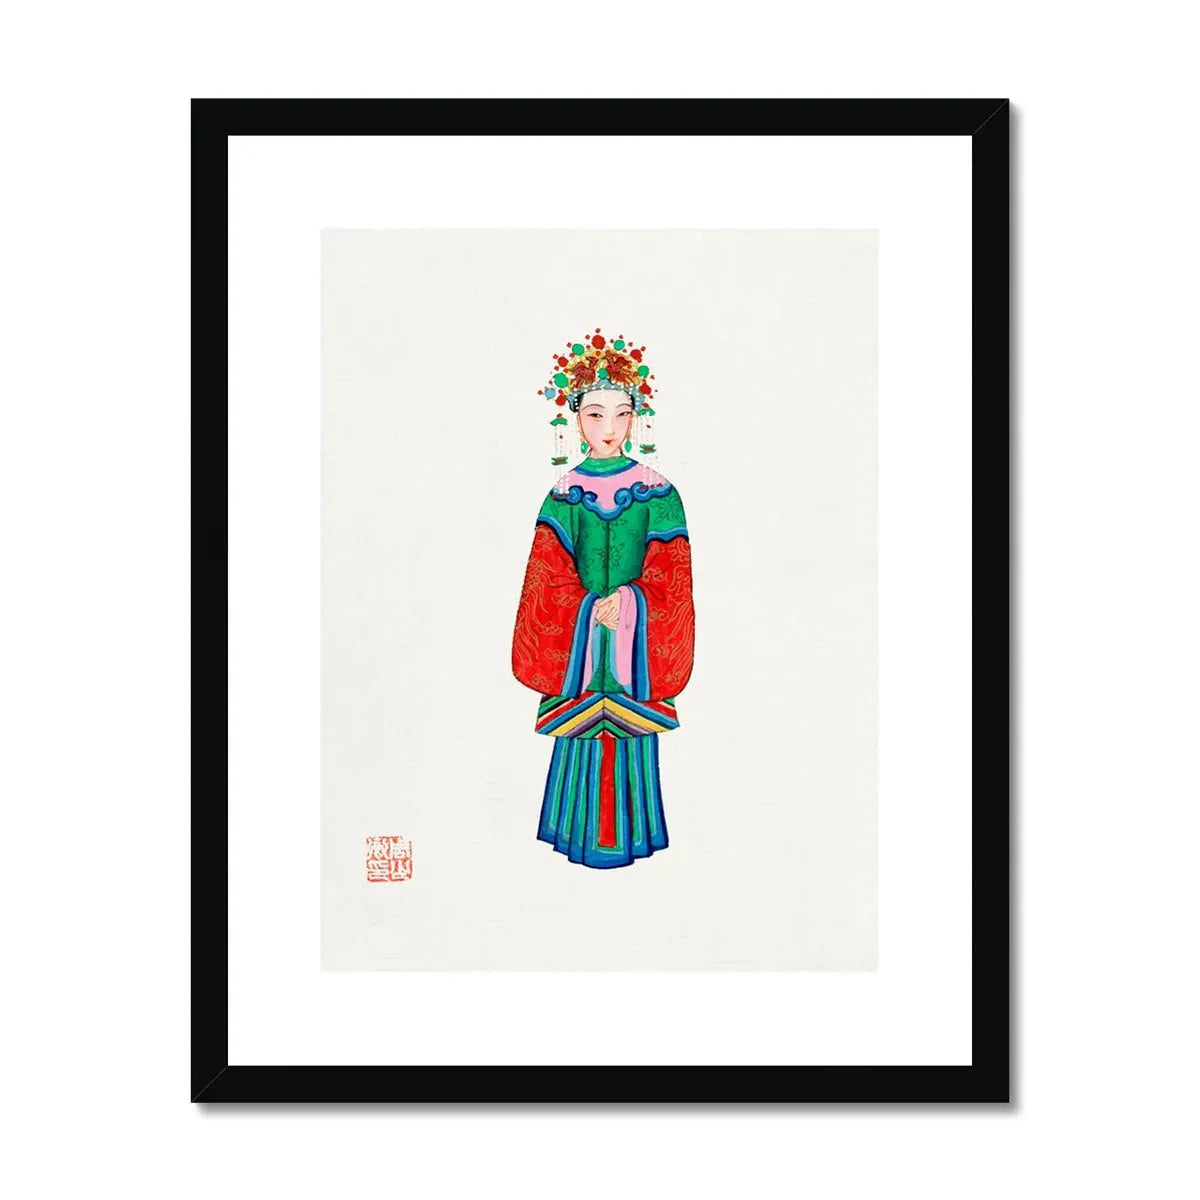 Chinese Imperial Princess Framed & Mounted Print - 16’x20’ / Black Frame - Posters Prints & Visual Artwork